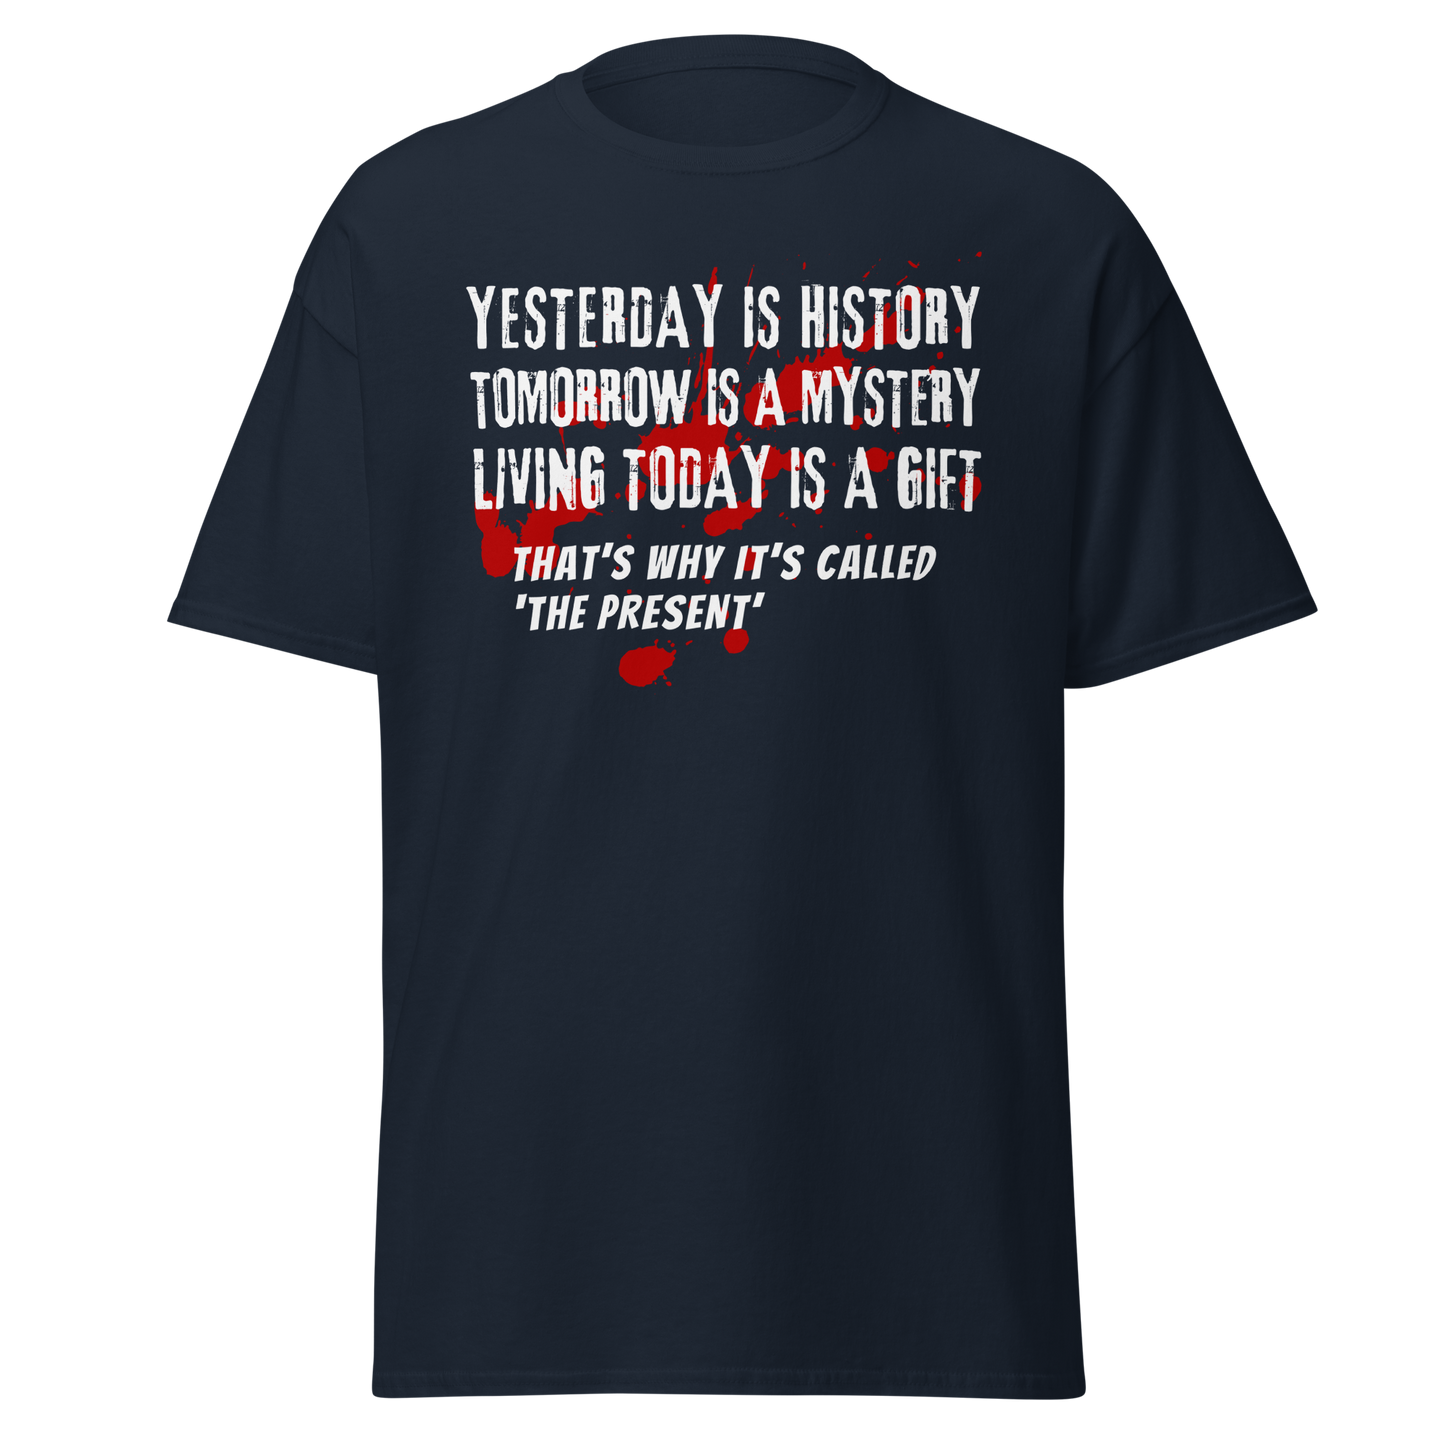 Yesterday Is History (t-shirt)